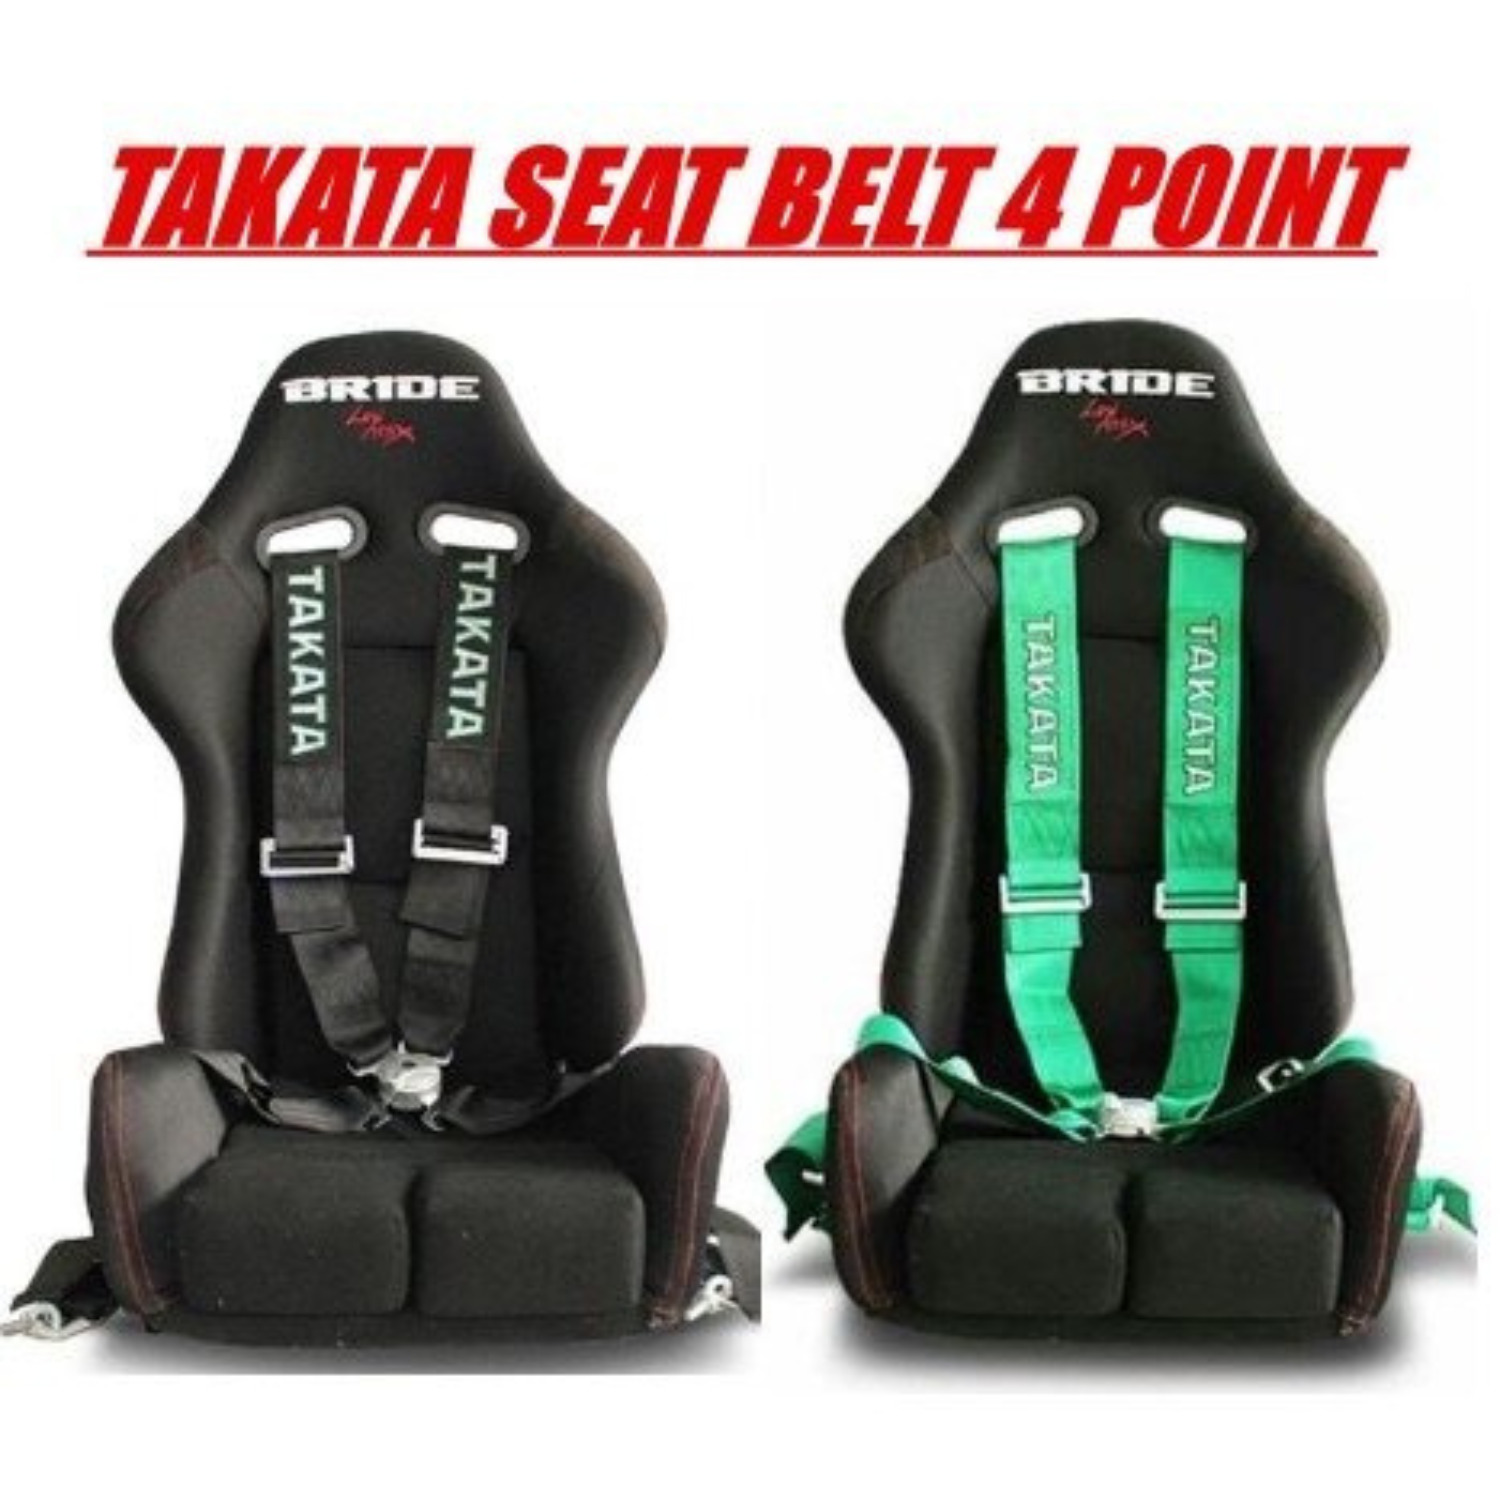 New Takata Japan Racing Seat Belt Harness 4 Point Snap-On 3